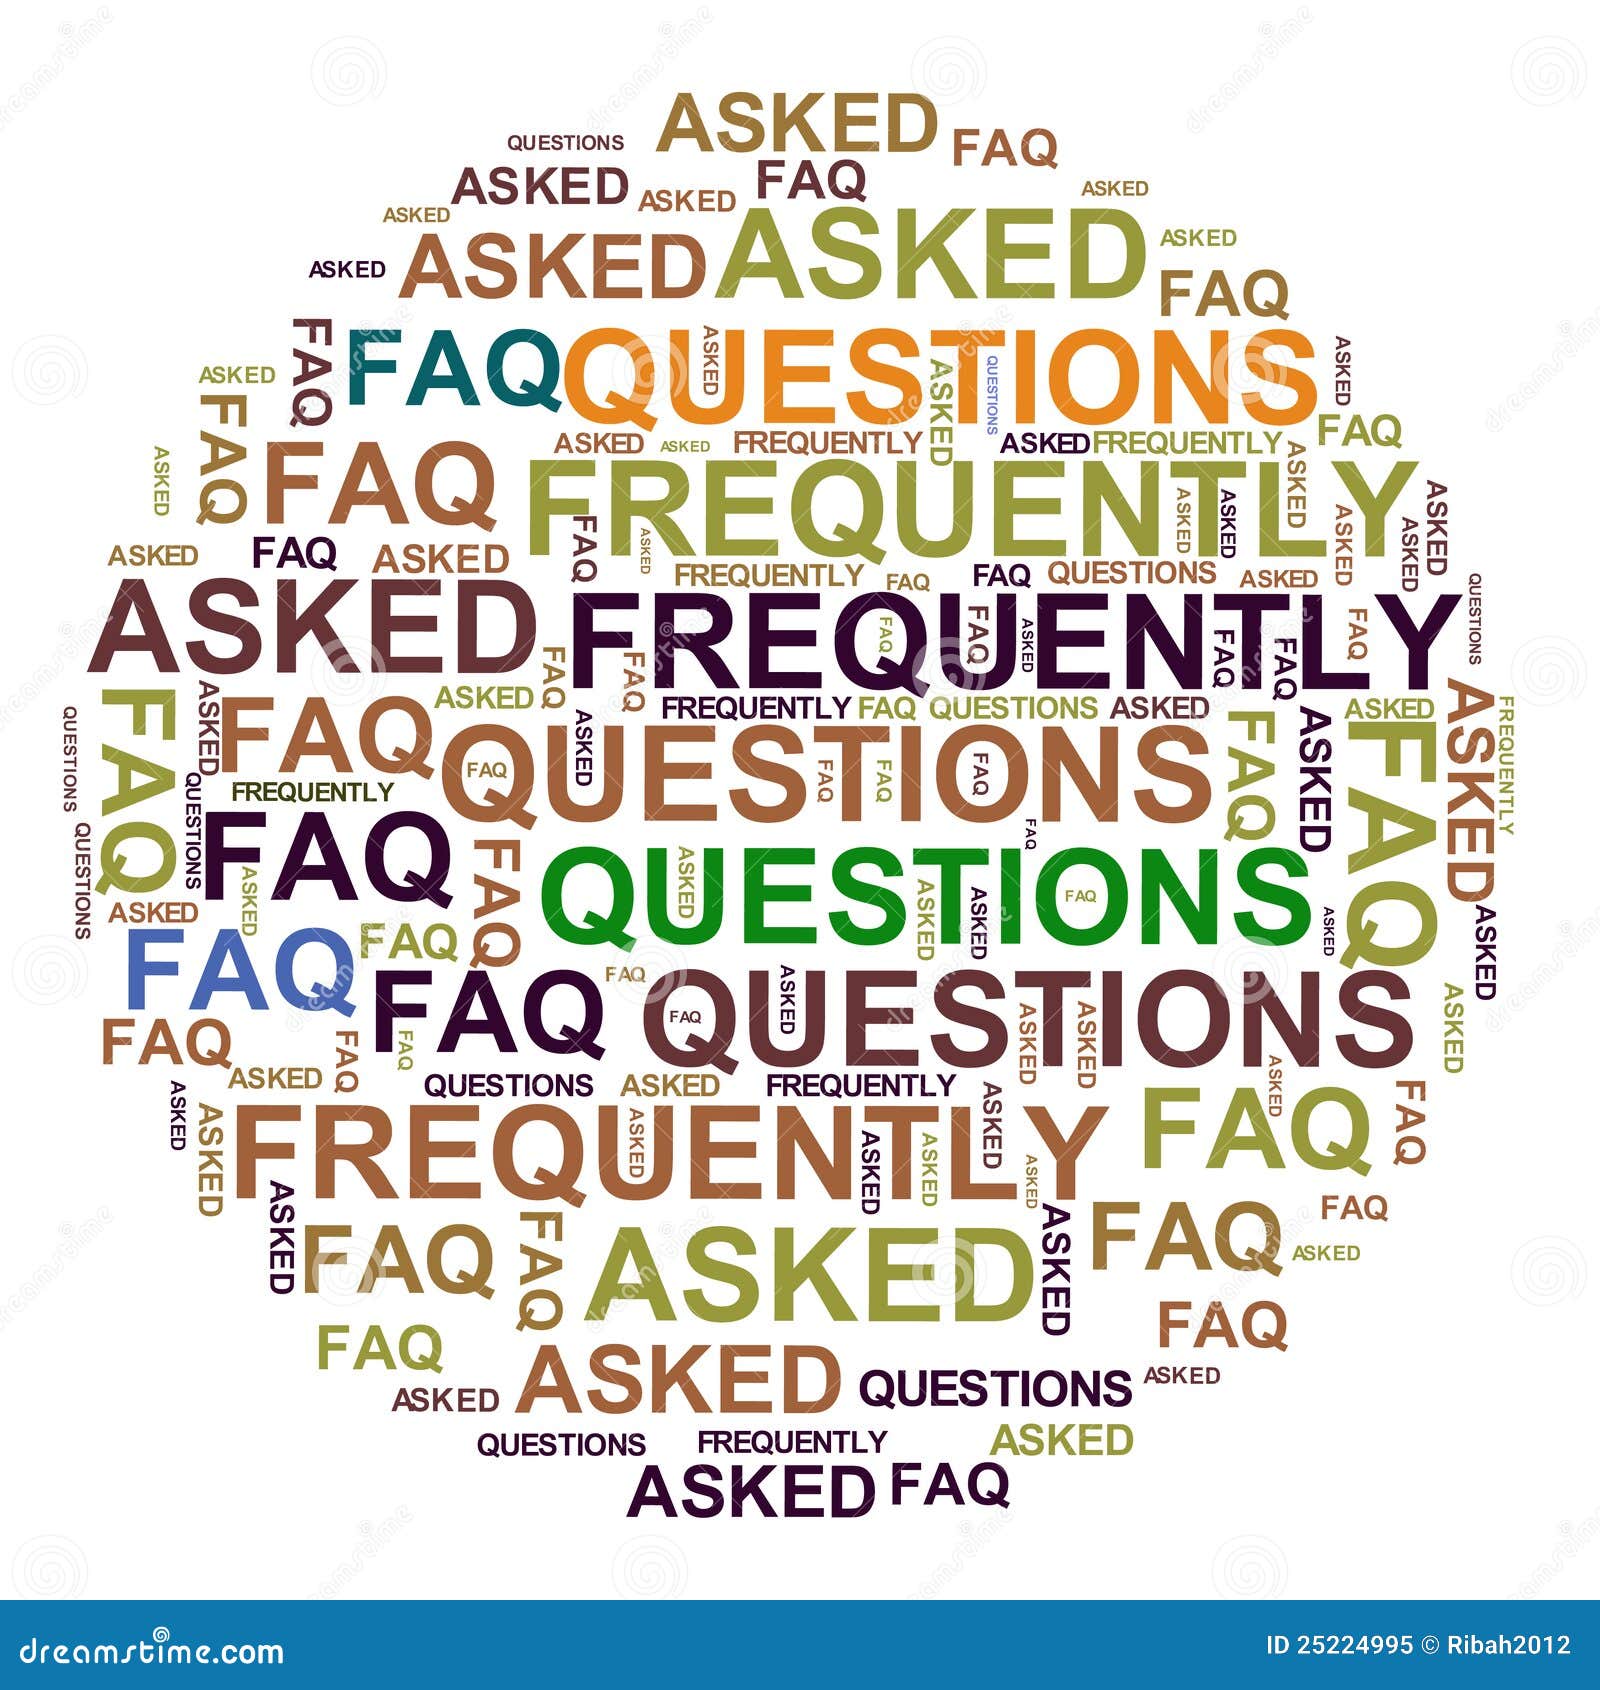 faq - frequently asked questions